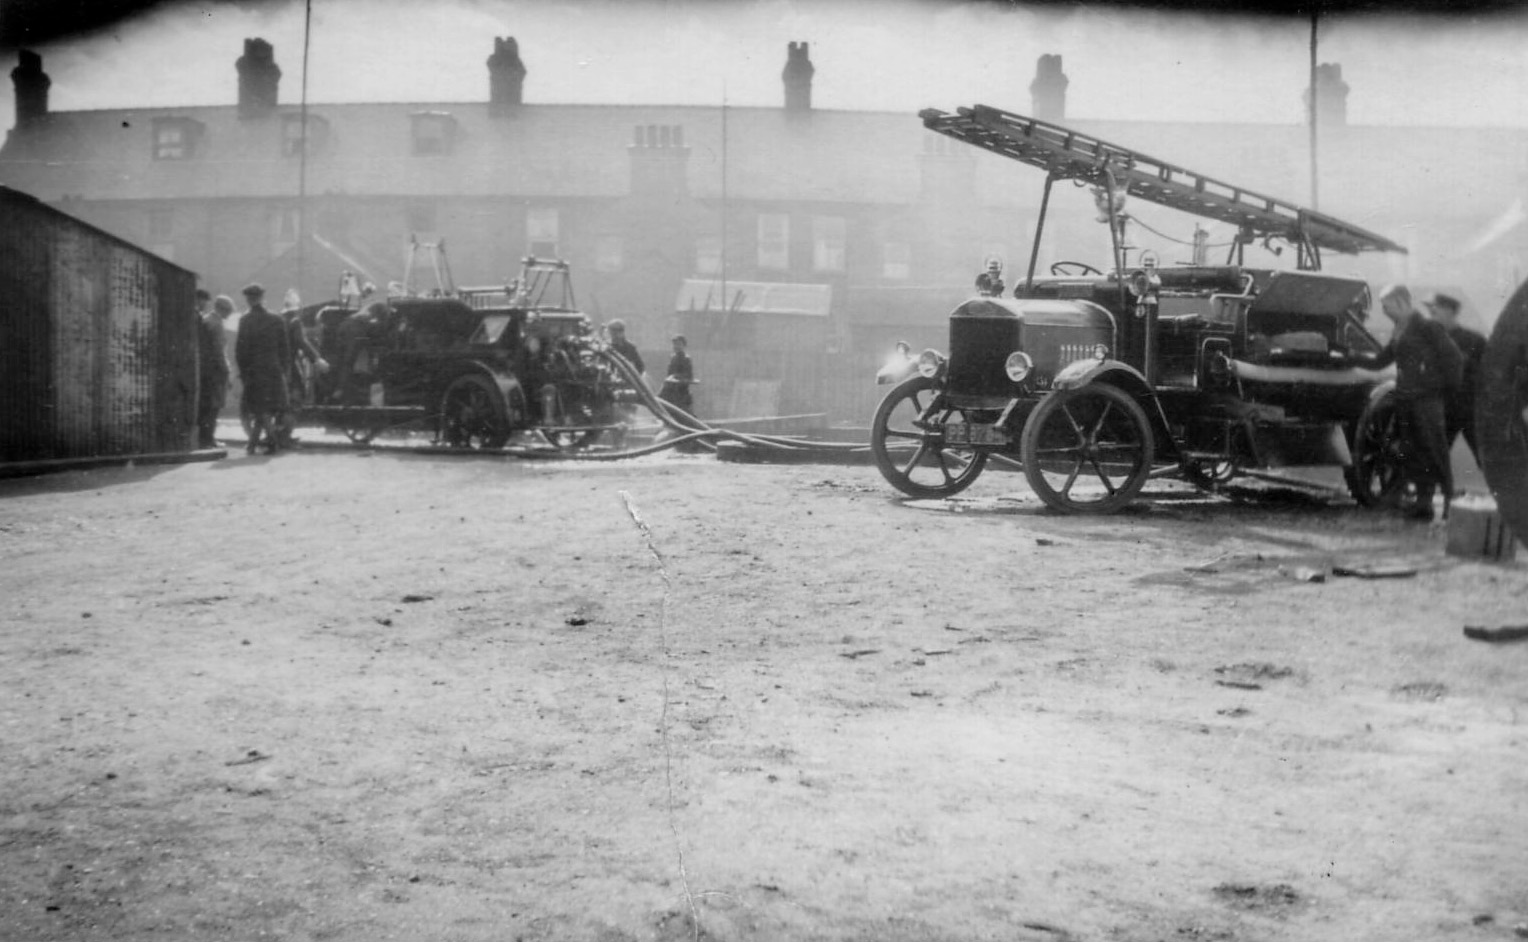 Black and white photo of 2 fire engines